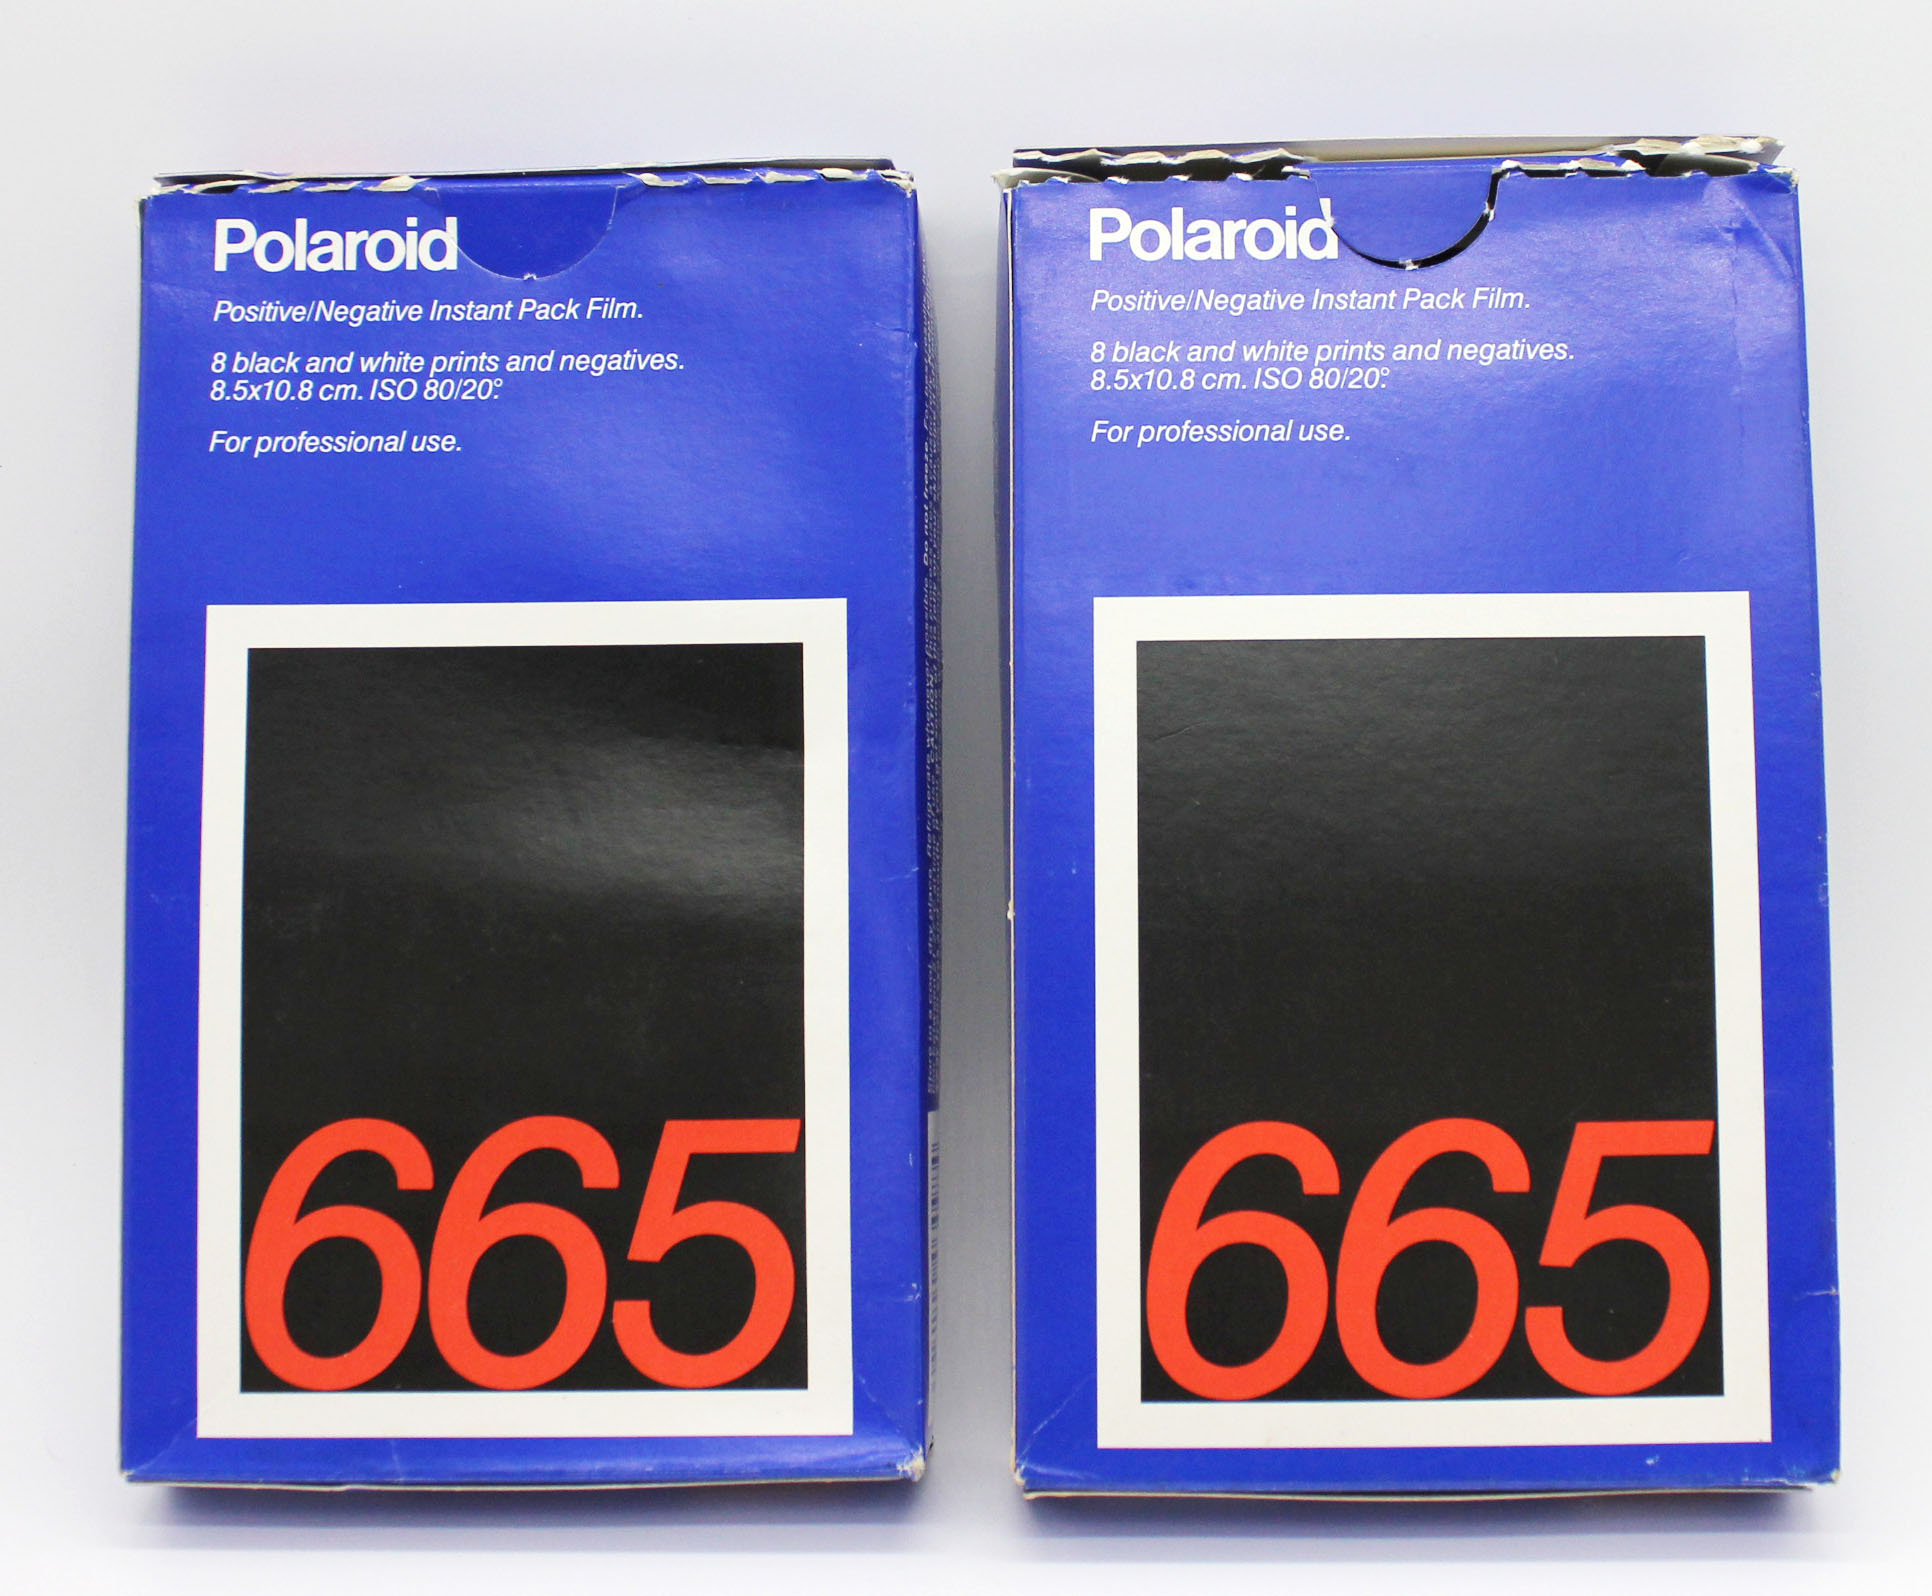  Polaroid 665 Positive / Negative Instant Pack Film (2 Packs) Expired 11/1992 from Japan Photo 1